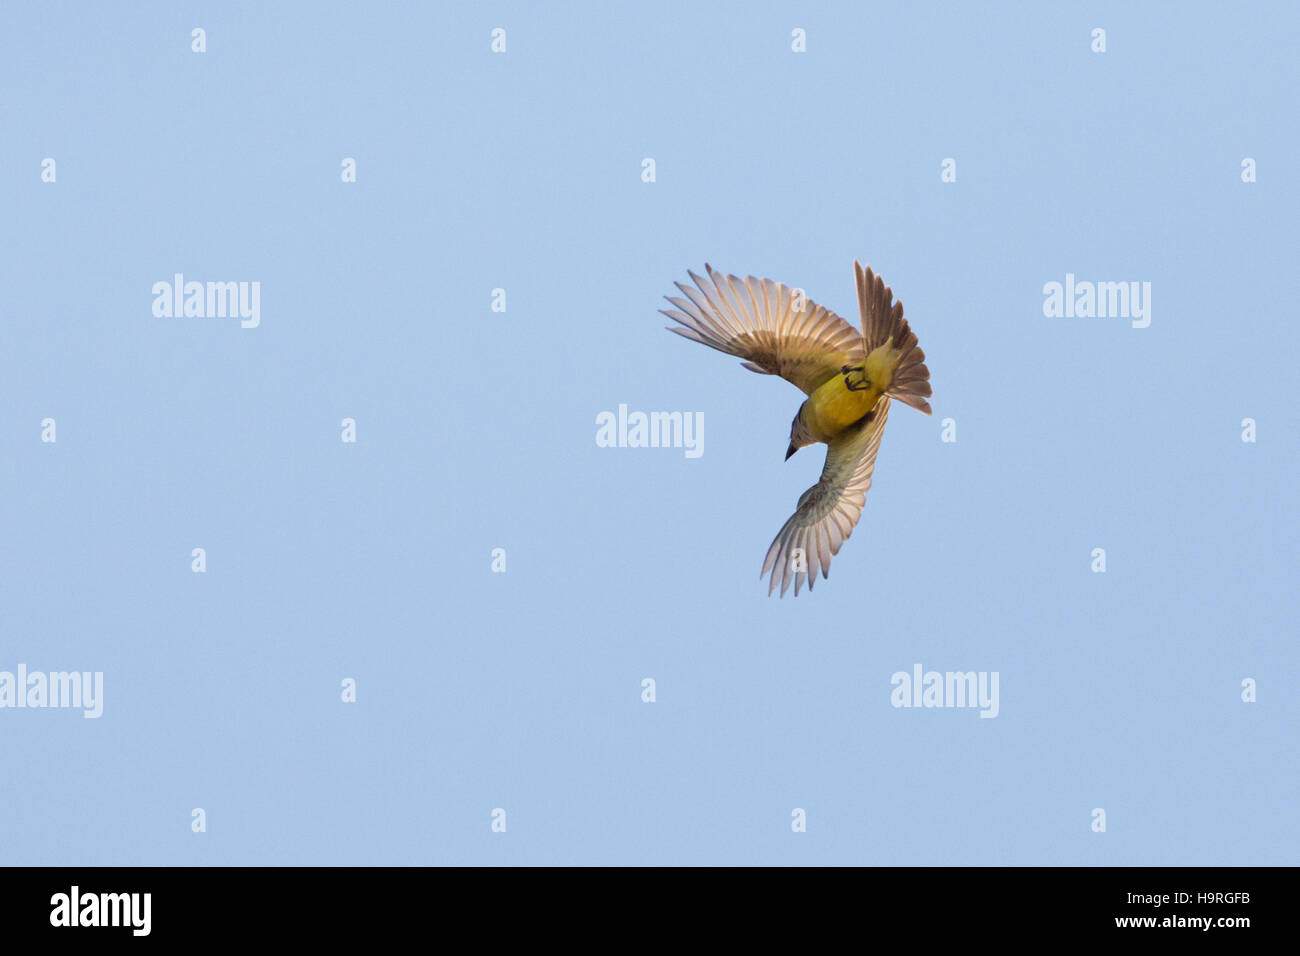 Asuncion, Paraguay. 25th November, 2016. A tropical kingbird (Tyrannus melancholicus) flycatching insects in the air, is seen during sunny day in Asuncion, Paraguay. Credit: Andre M. Chang/Alamy Live News Stock Photo